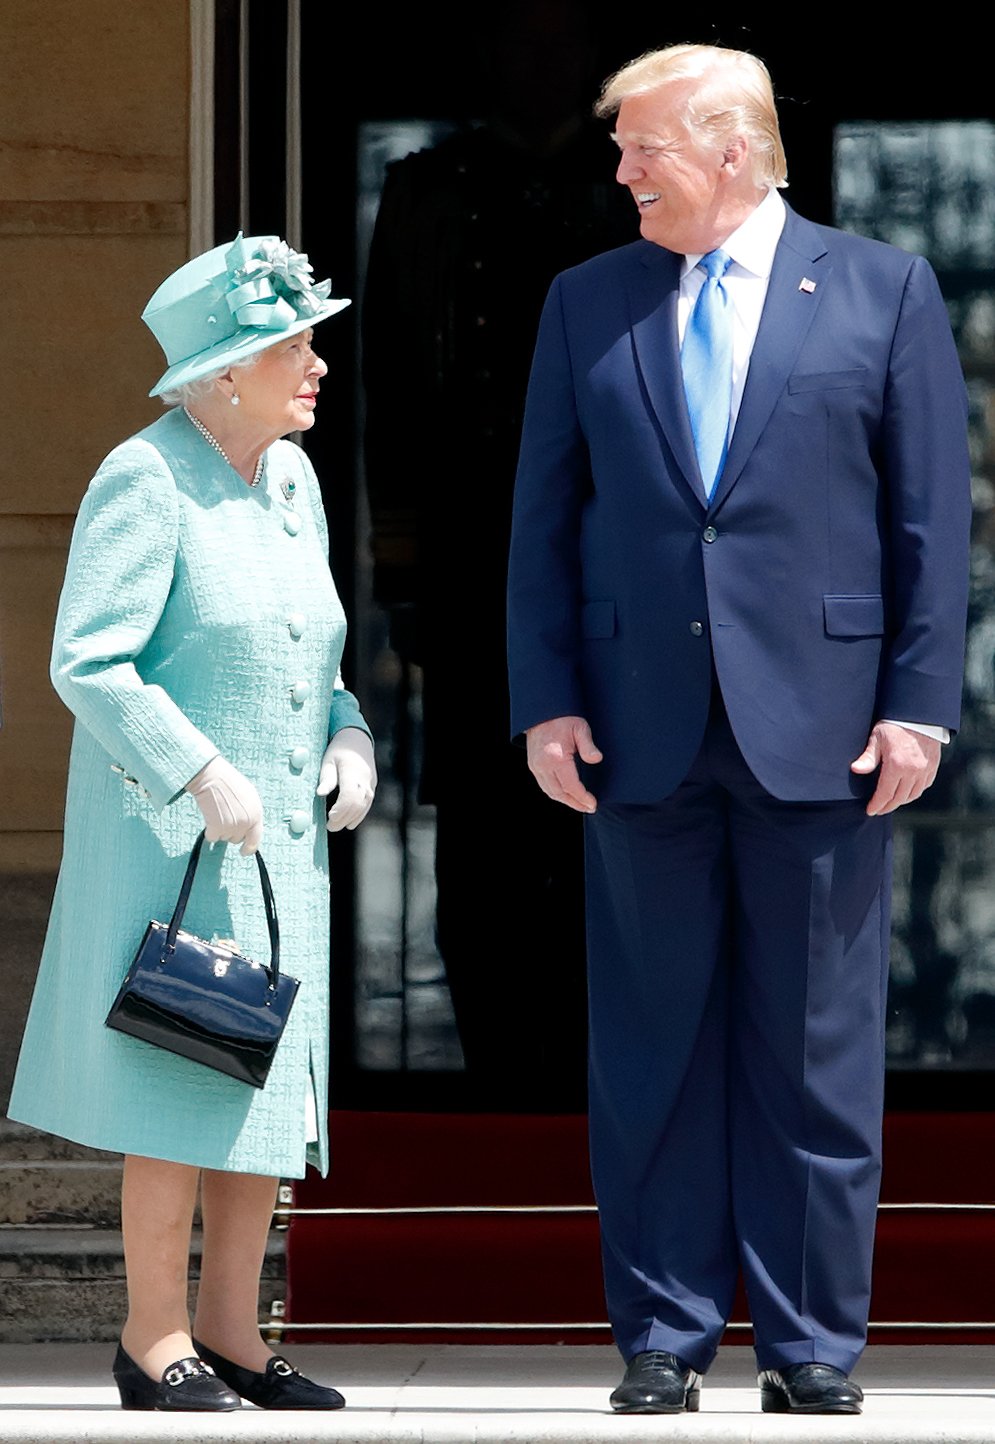 Queen Elizabeth II and US President Donald Trump during his state visit to the UK on June 3, 2019, in London, England. | Source: Getty Images.